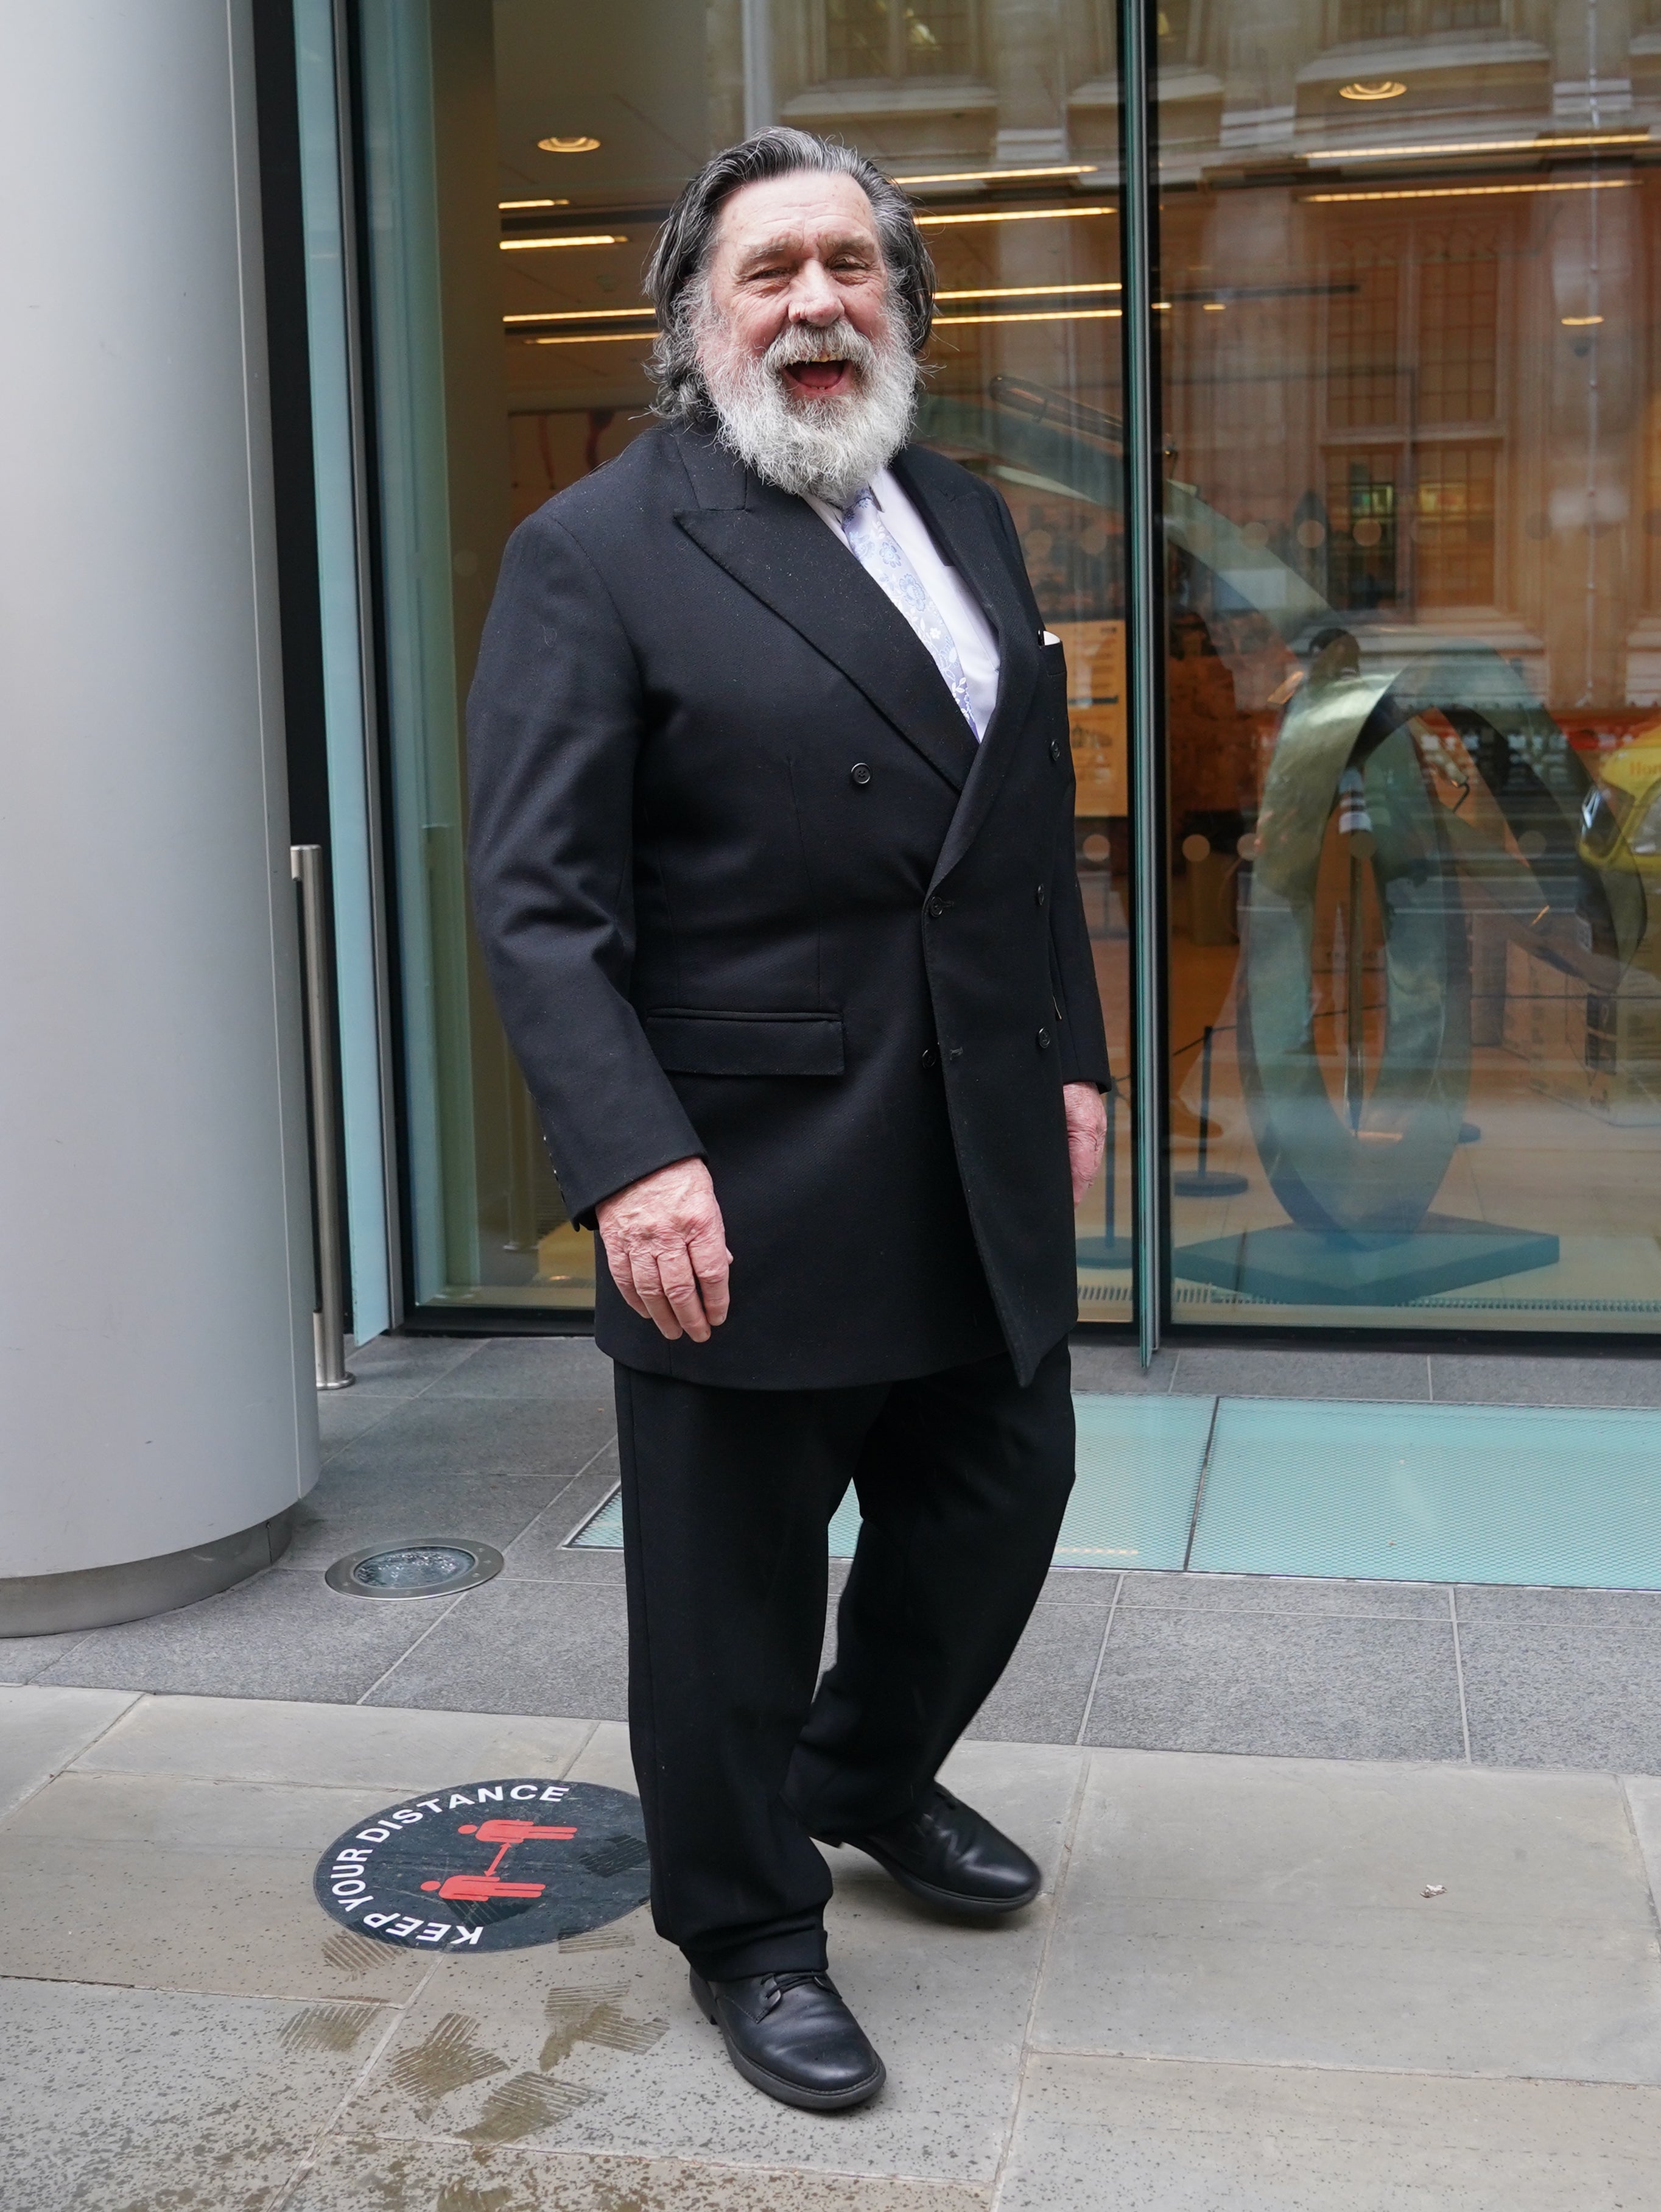 Actor Ricky Tomlinson’s legal battle against a newspaper publisher over alleged unlawful information gathering will be allowed to continue, a High Court judge has ruled (PA)